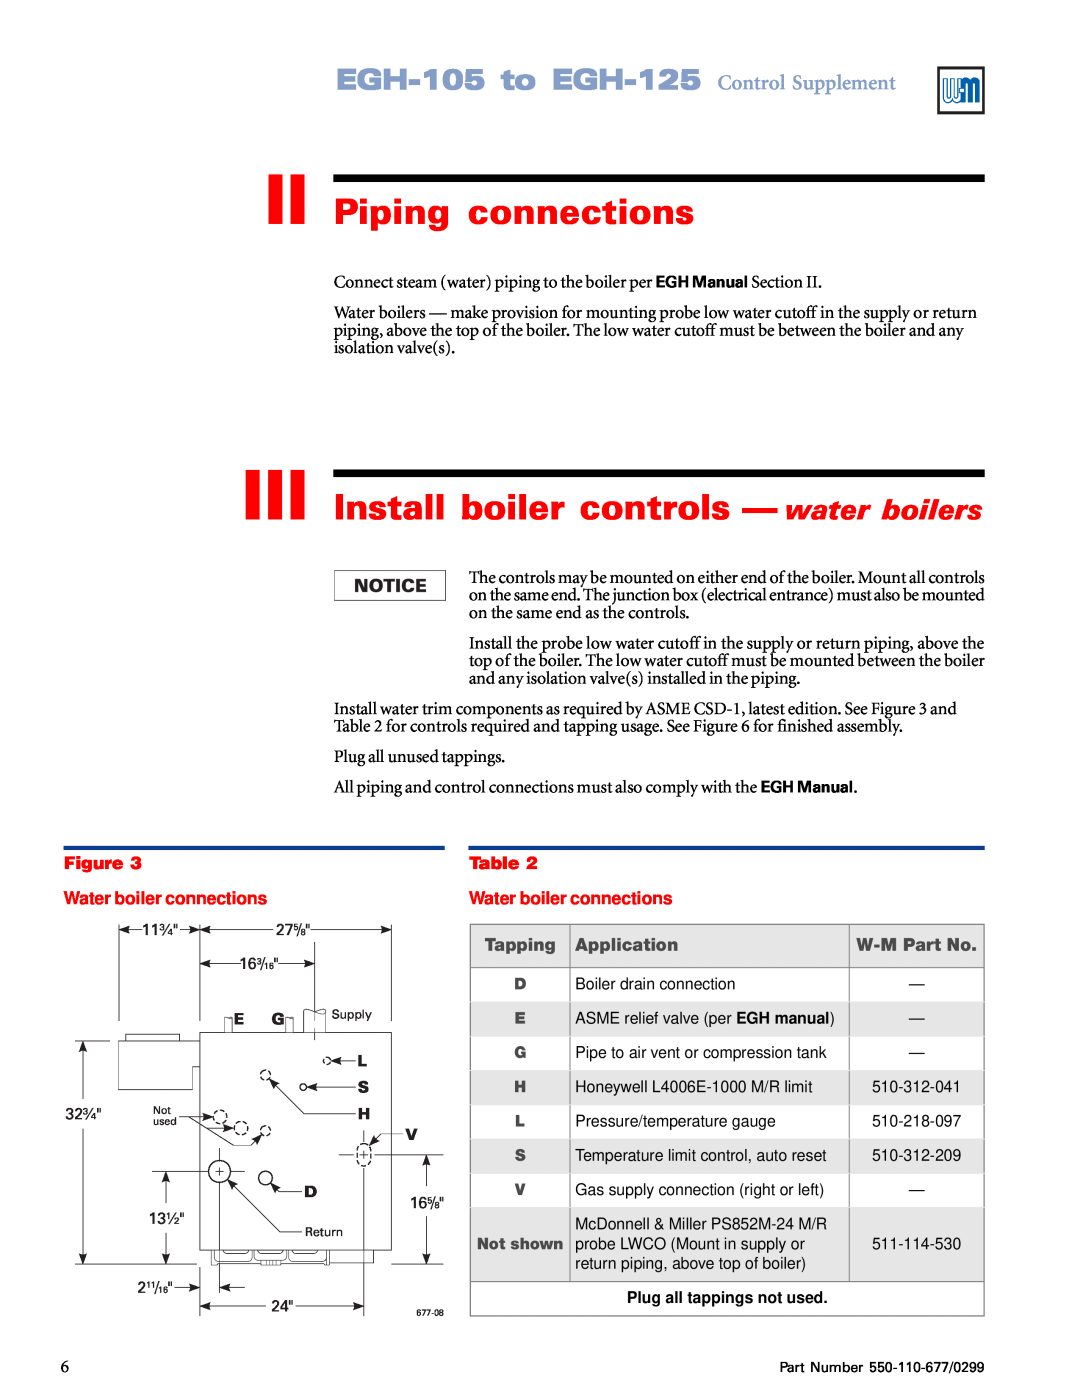 Weil-McLain EGH-105 II Piping connections, III Install boiler controls - water boilers, Application, W-MPart No, Tapping 